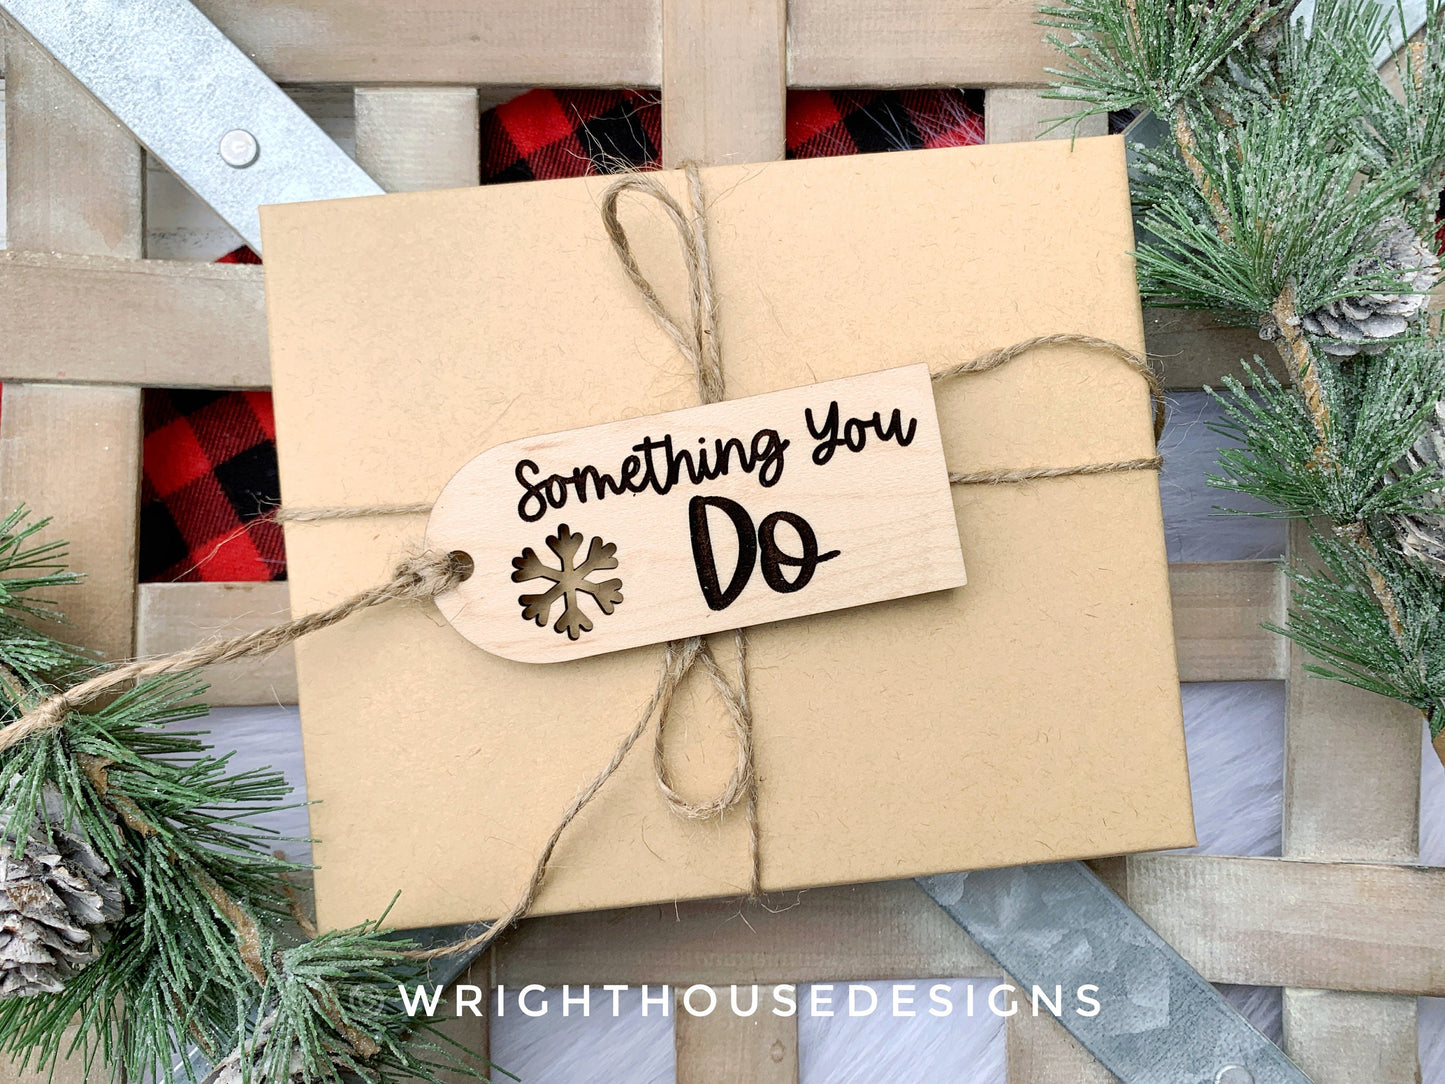 Something You Want, Need, Wear, Read, Share, Do Christmas Gift Tag Set - Wooden Engraved Present Tags For Kids - Reusable Gift Wrapping Tags